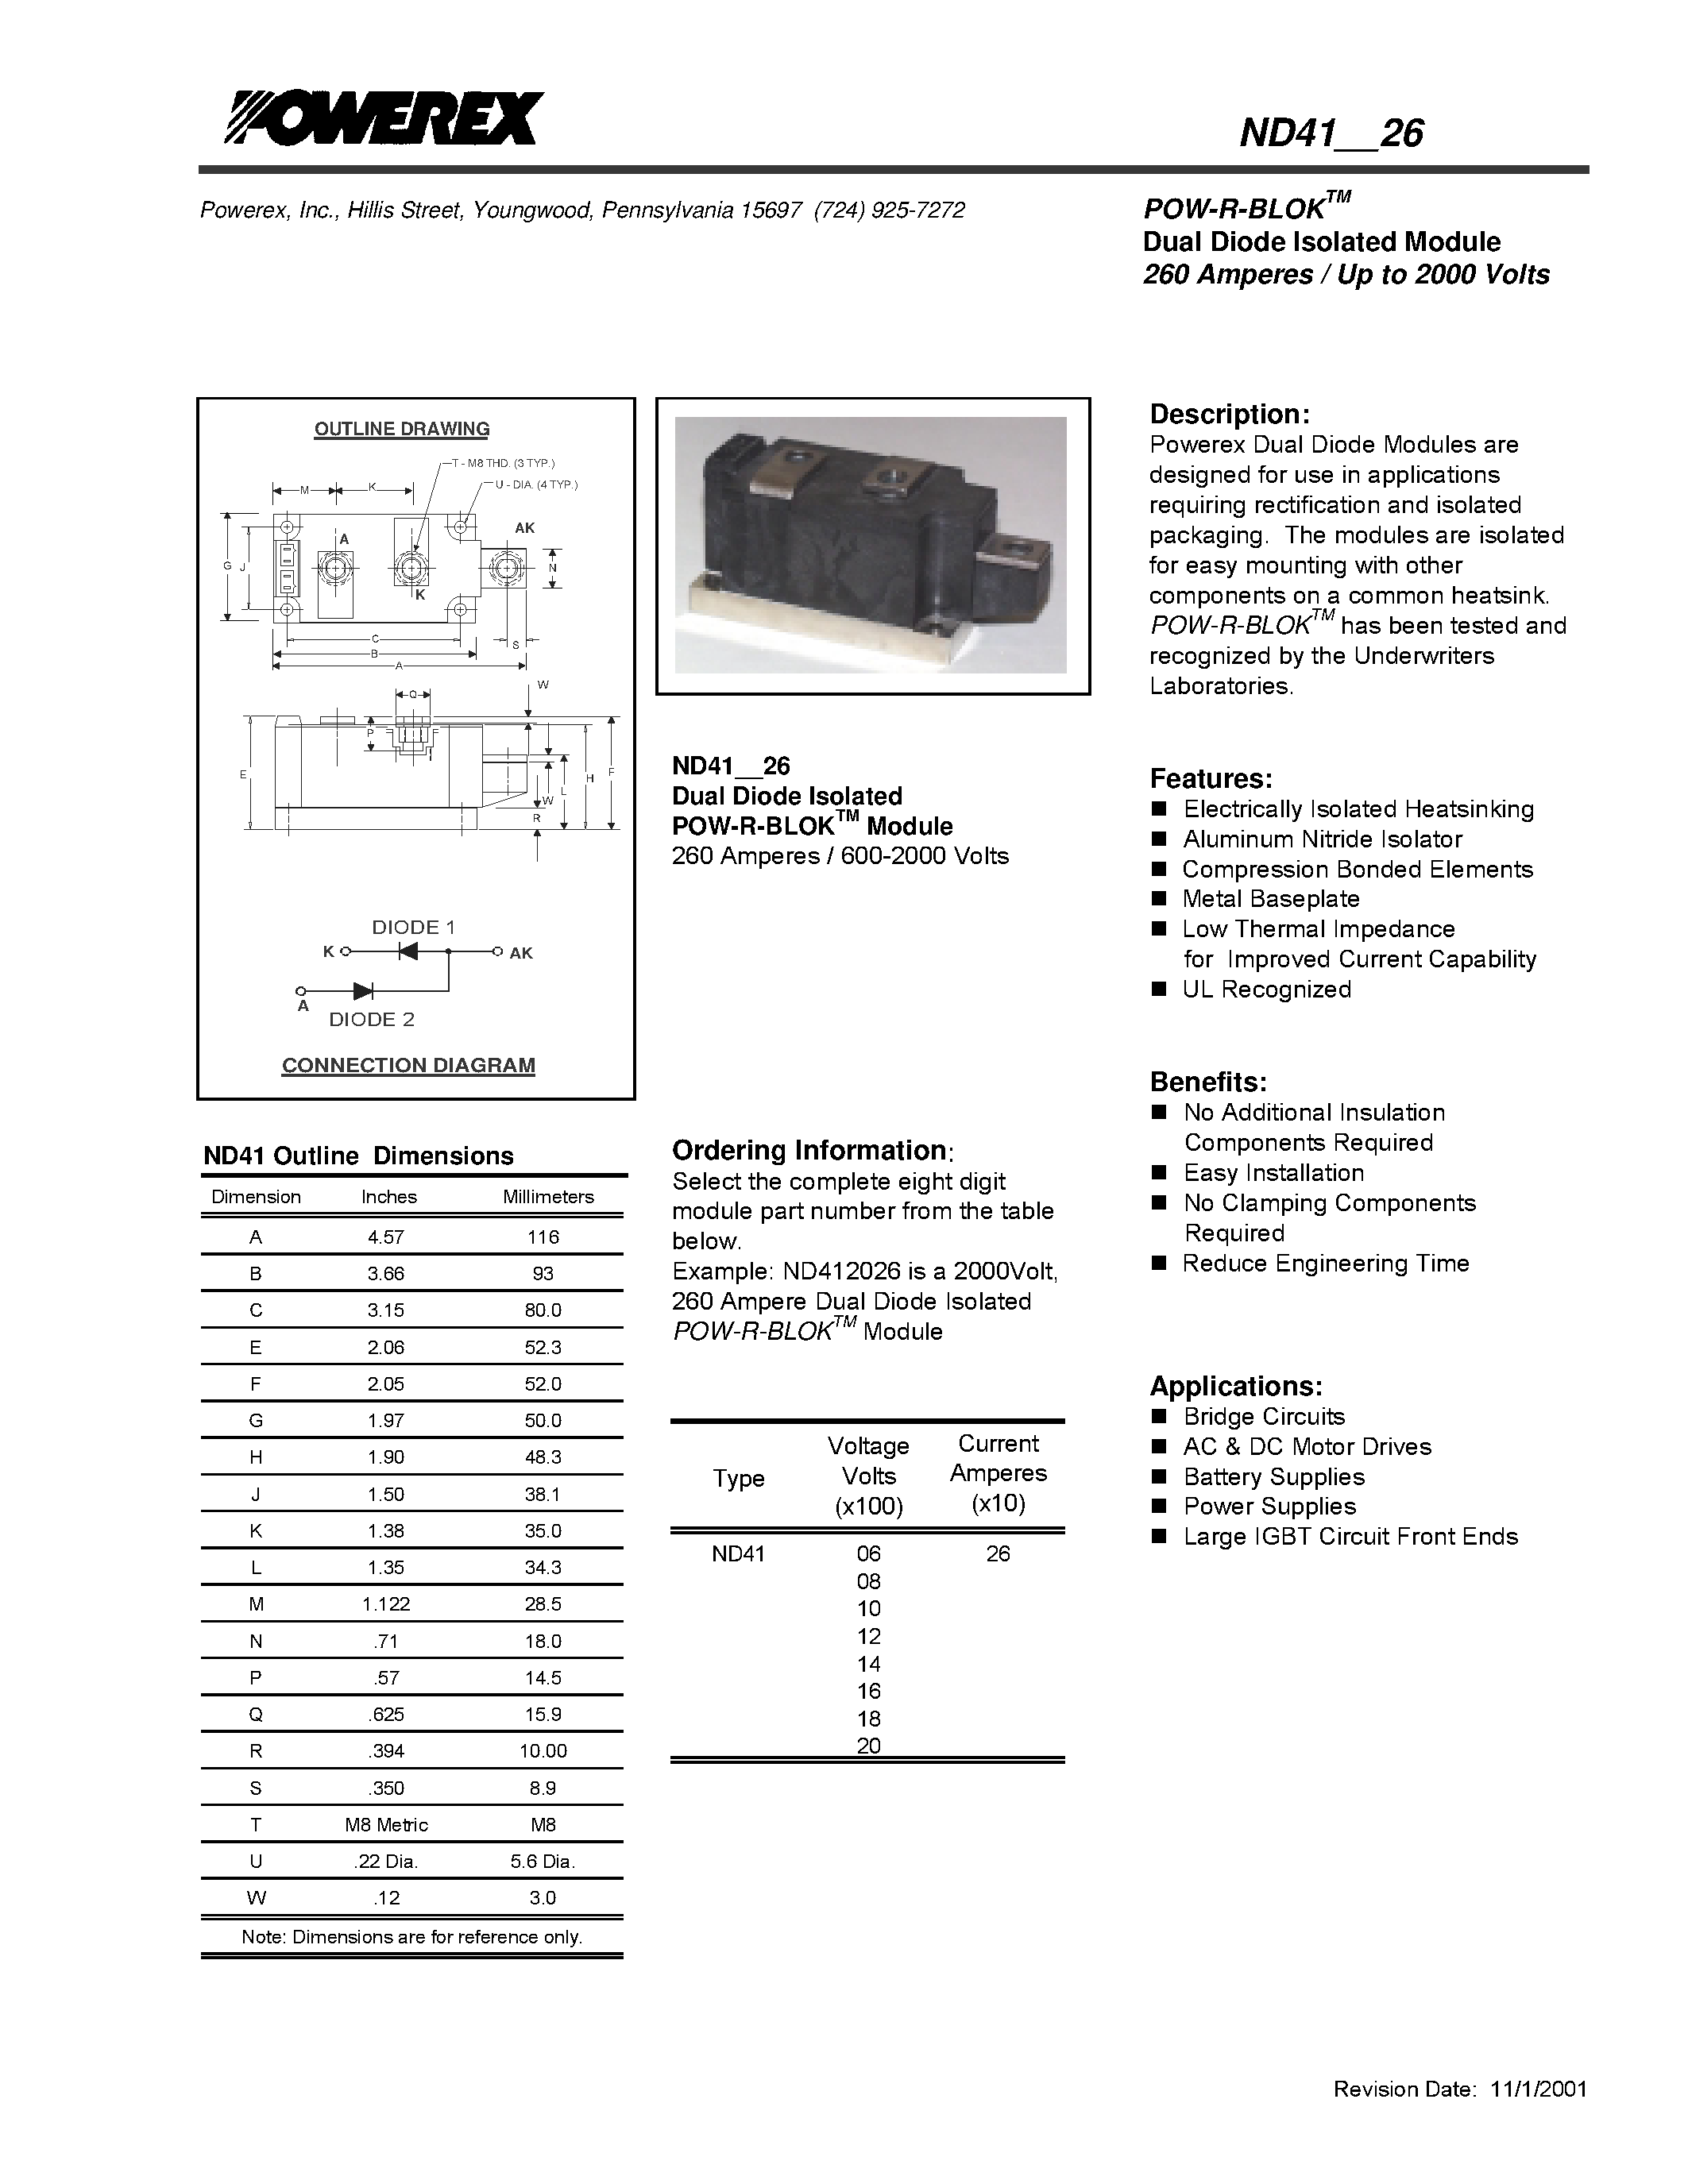 Datasheet ND411026 - POW-R-BLOK Dual Diode Isolated Module (260 Amperes / Up to 2000 Volts) page 1